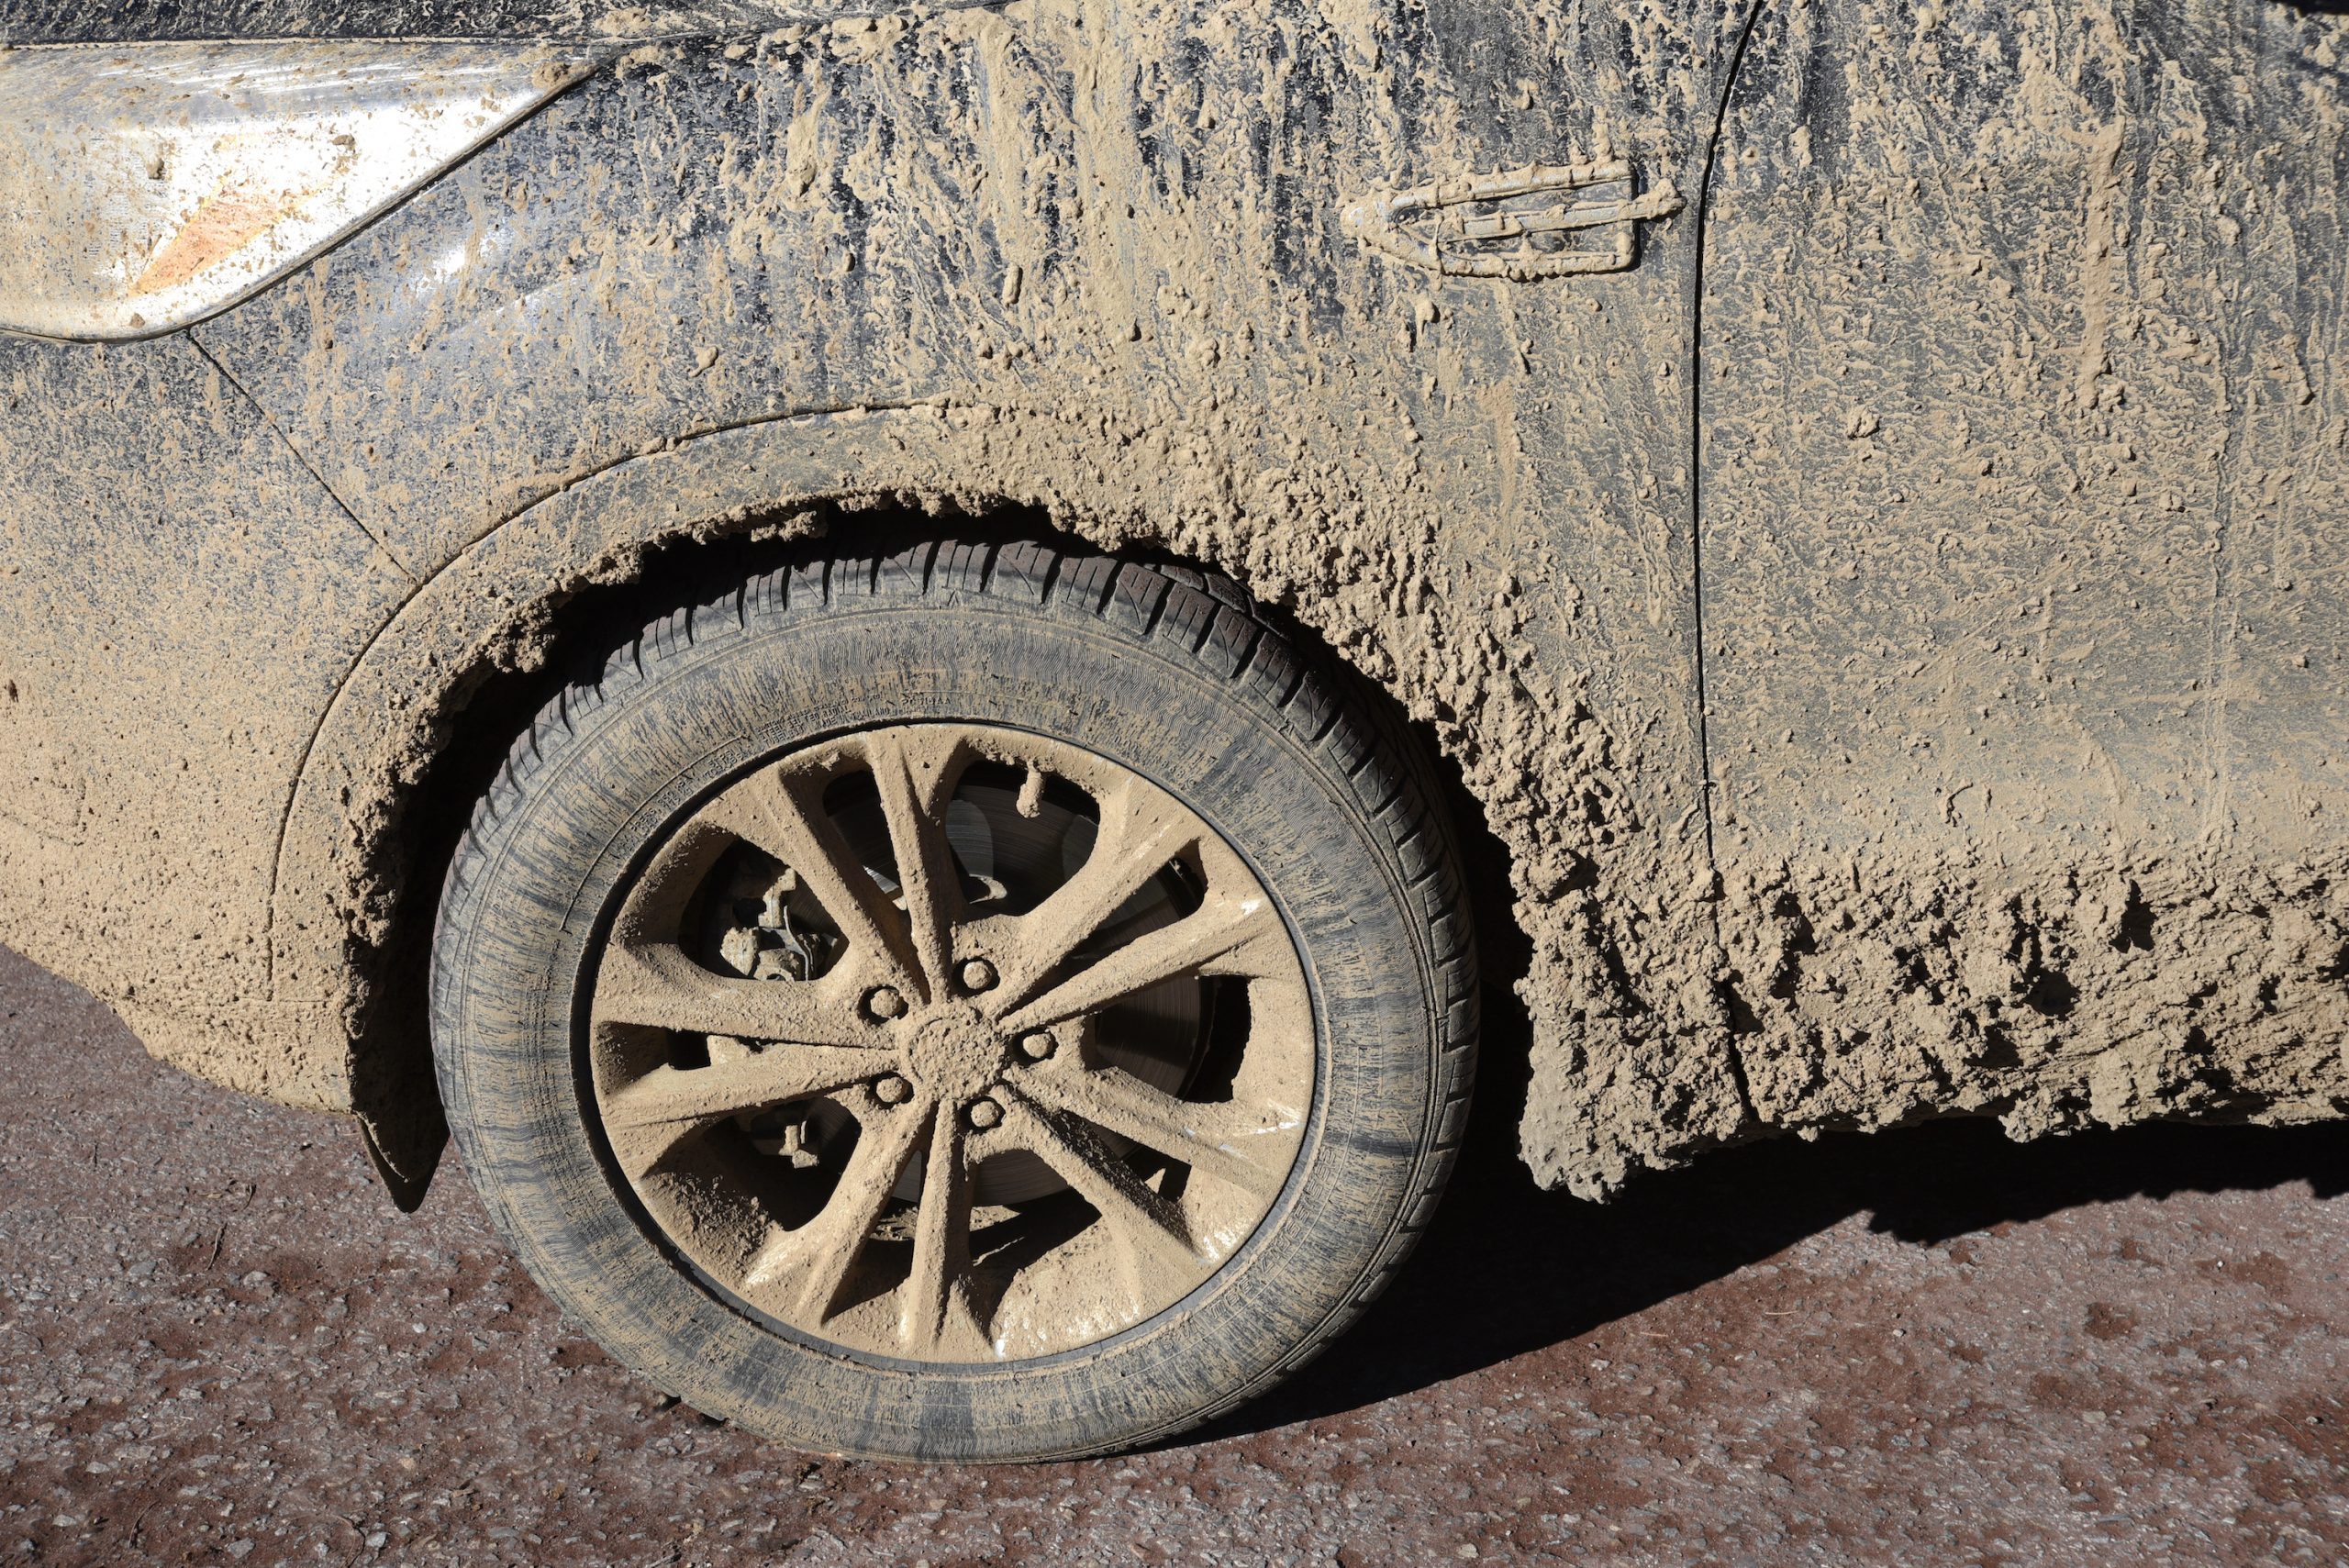 A car with caked on mud and dirt